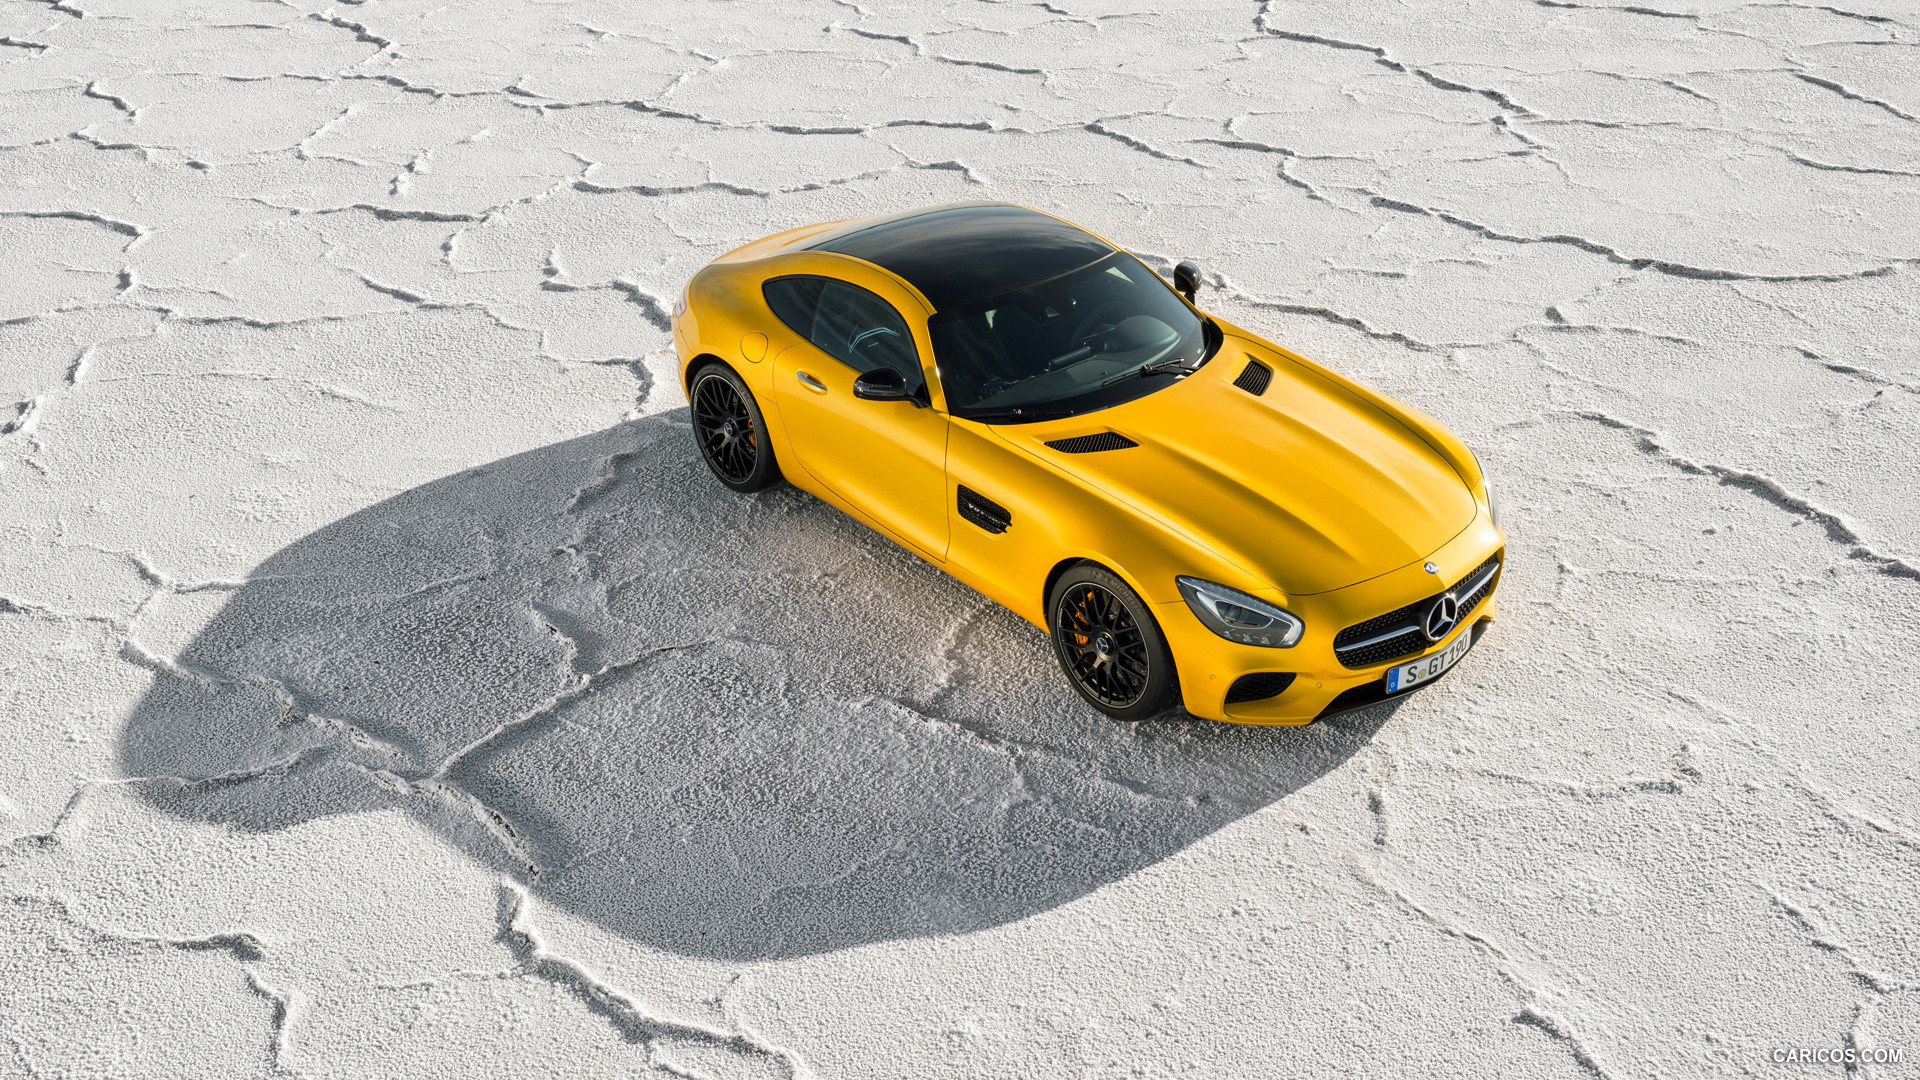 2016 Mercedes-AMG GT (Solarbeam) - Top, #73 of 190